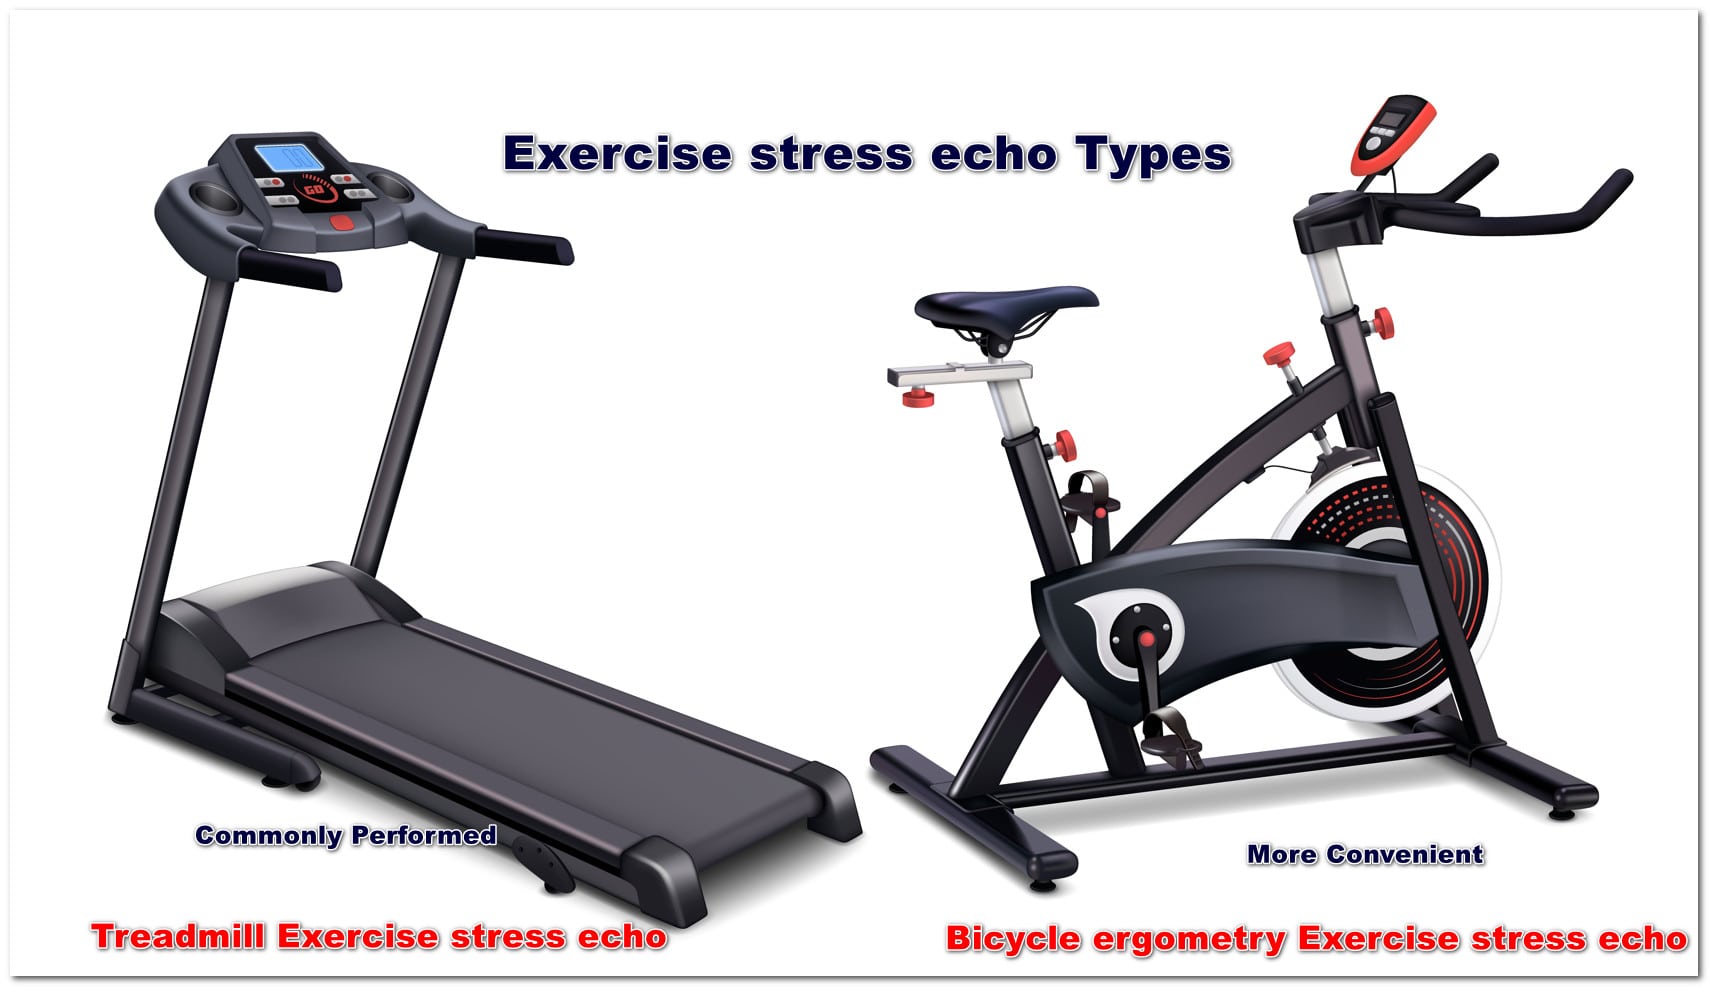 Types of Exercise stress echo like treadmill and Bicycle ergometry 